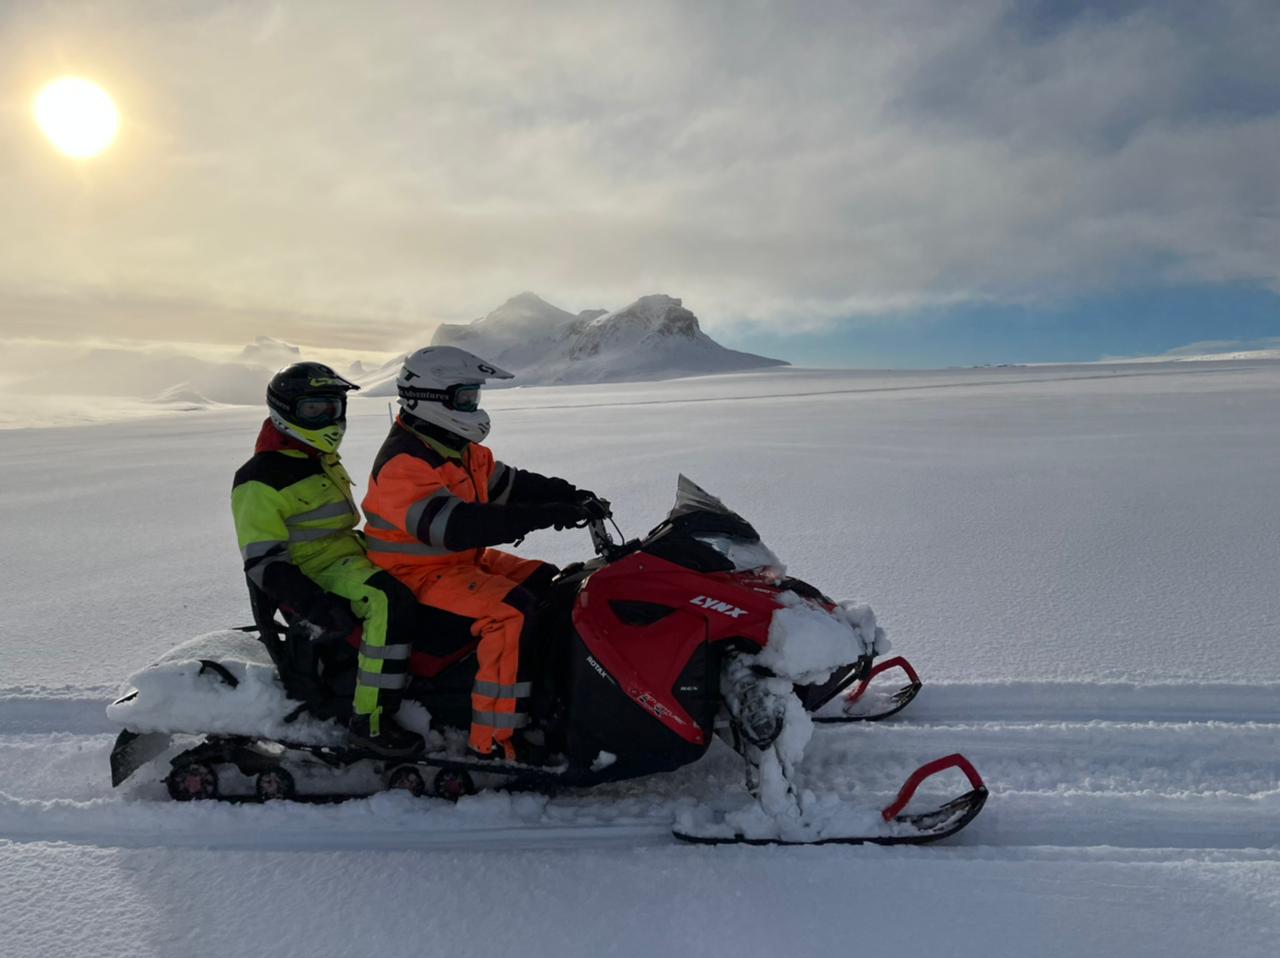 Two people riding on a snowmobile together on Langjokull glacier.